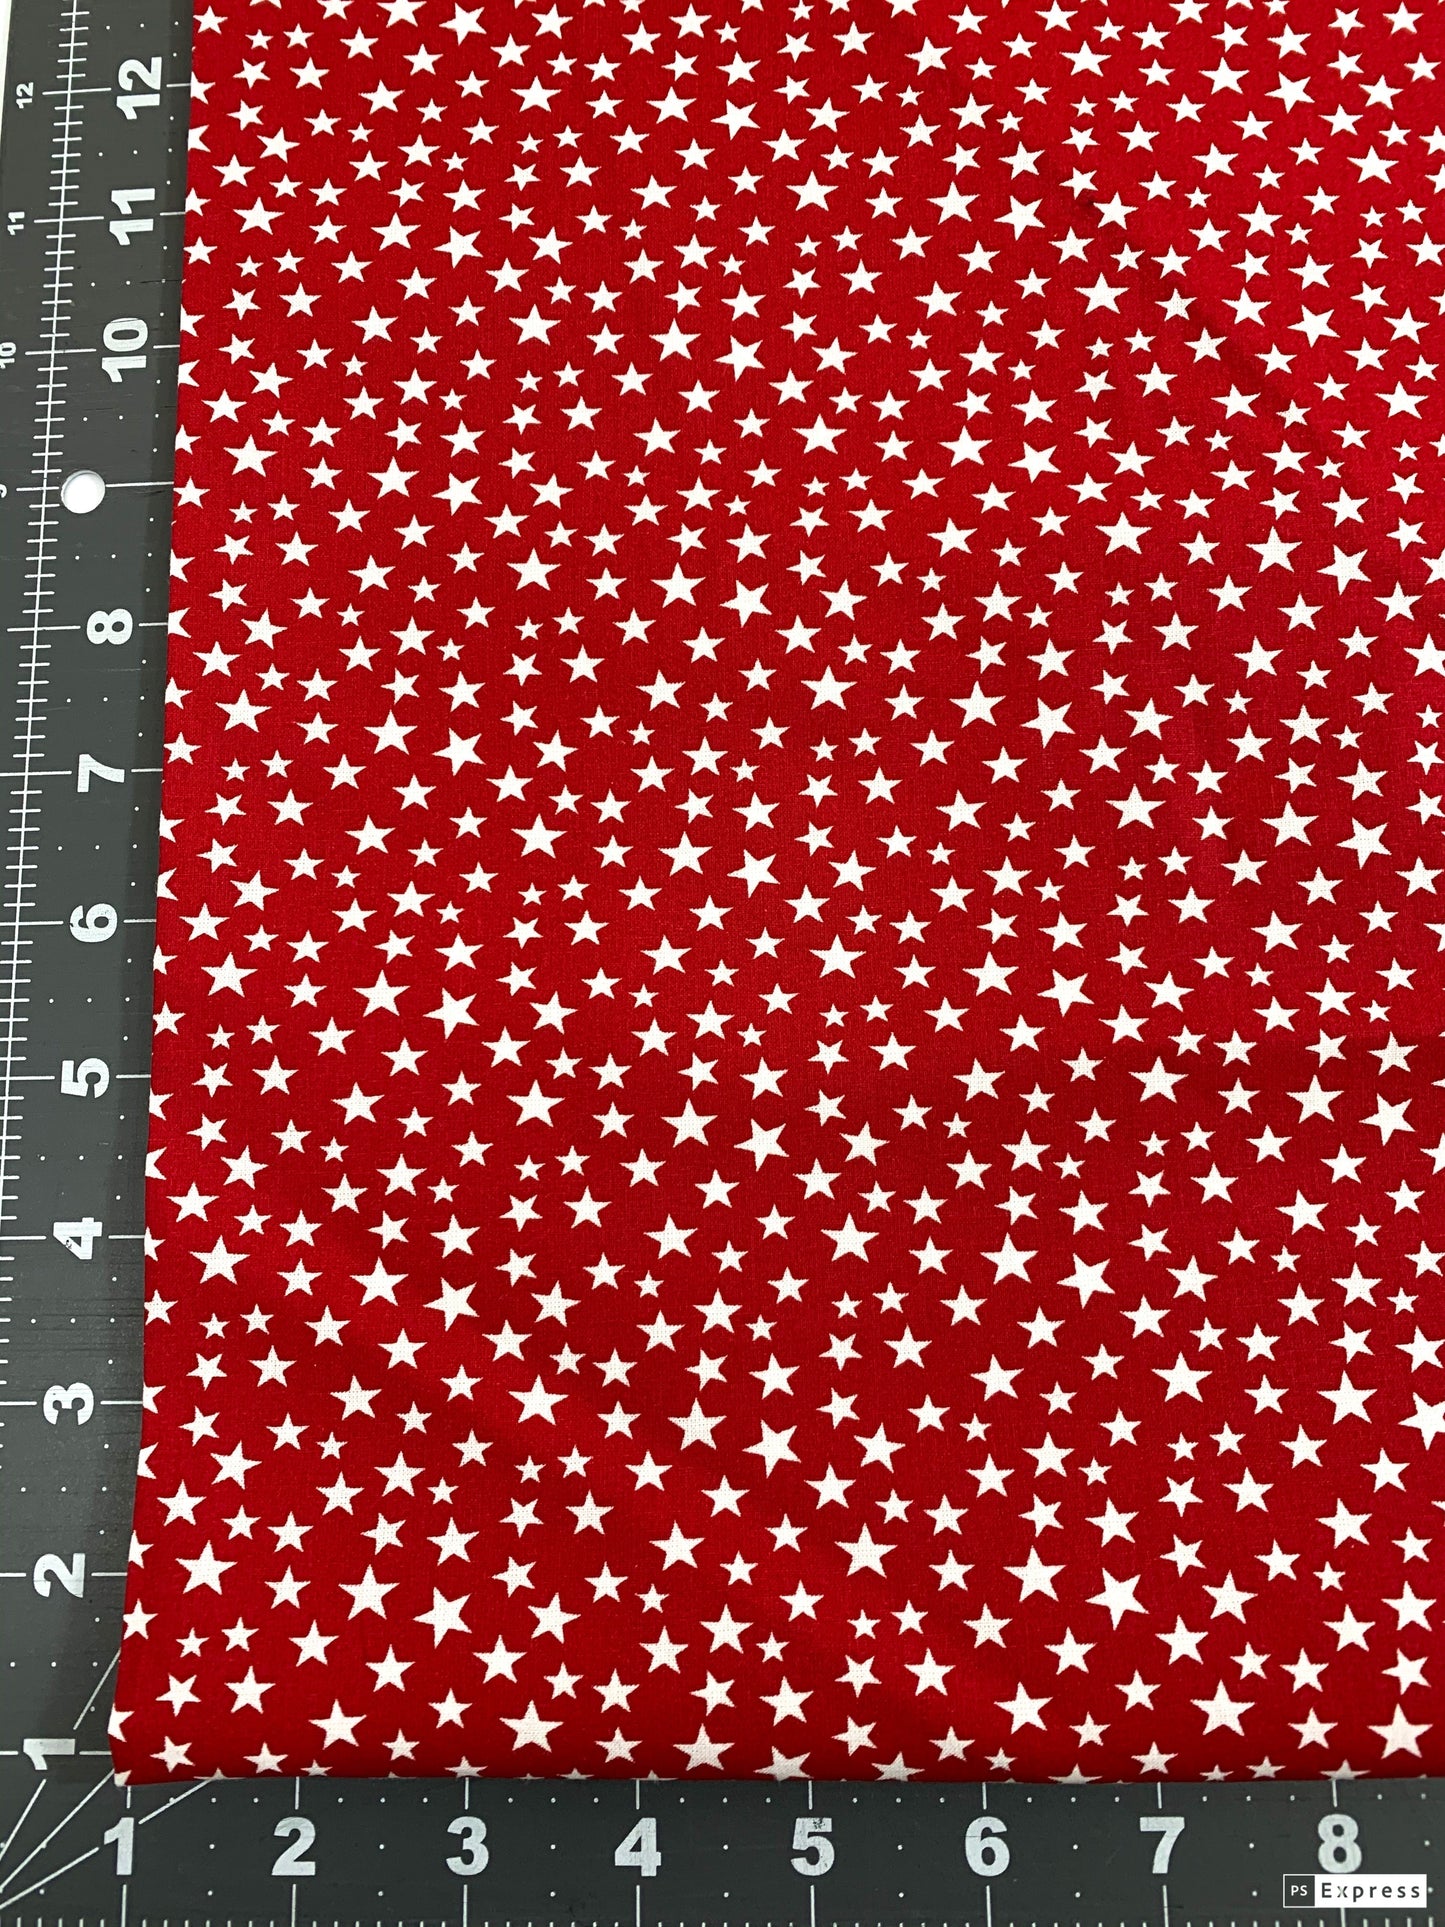 Red White Star USA fabric 48488 Made in the USA patriotic fabric